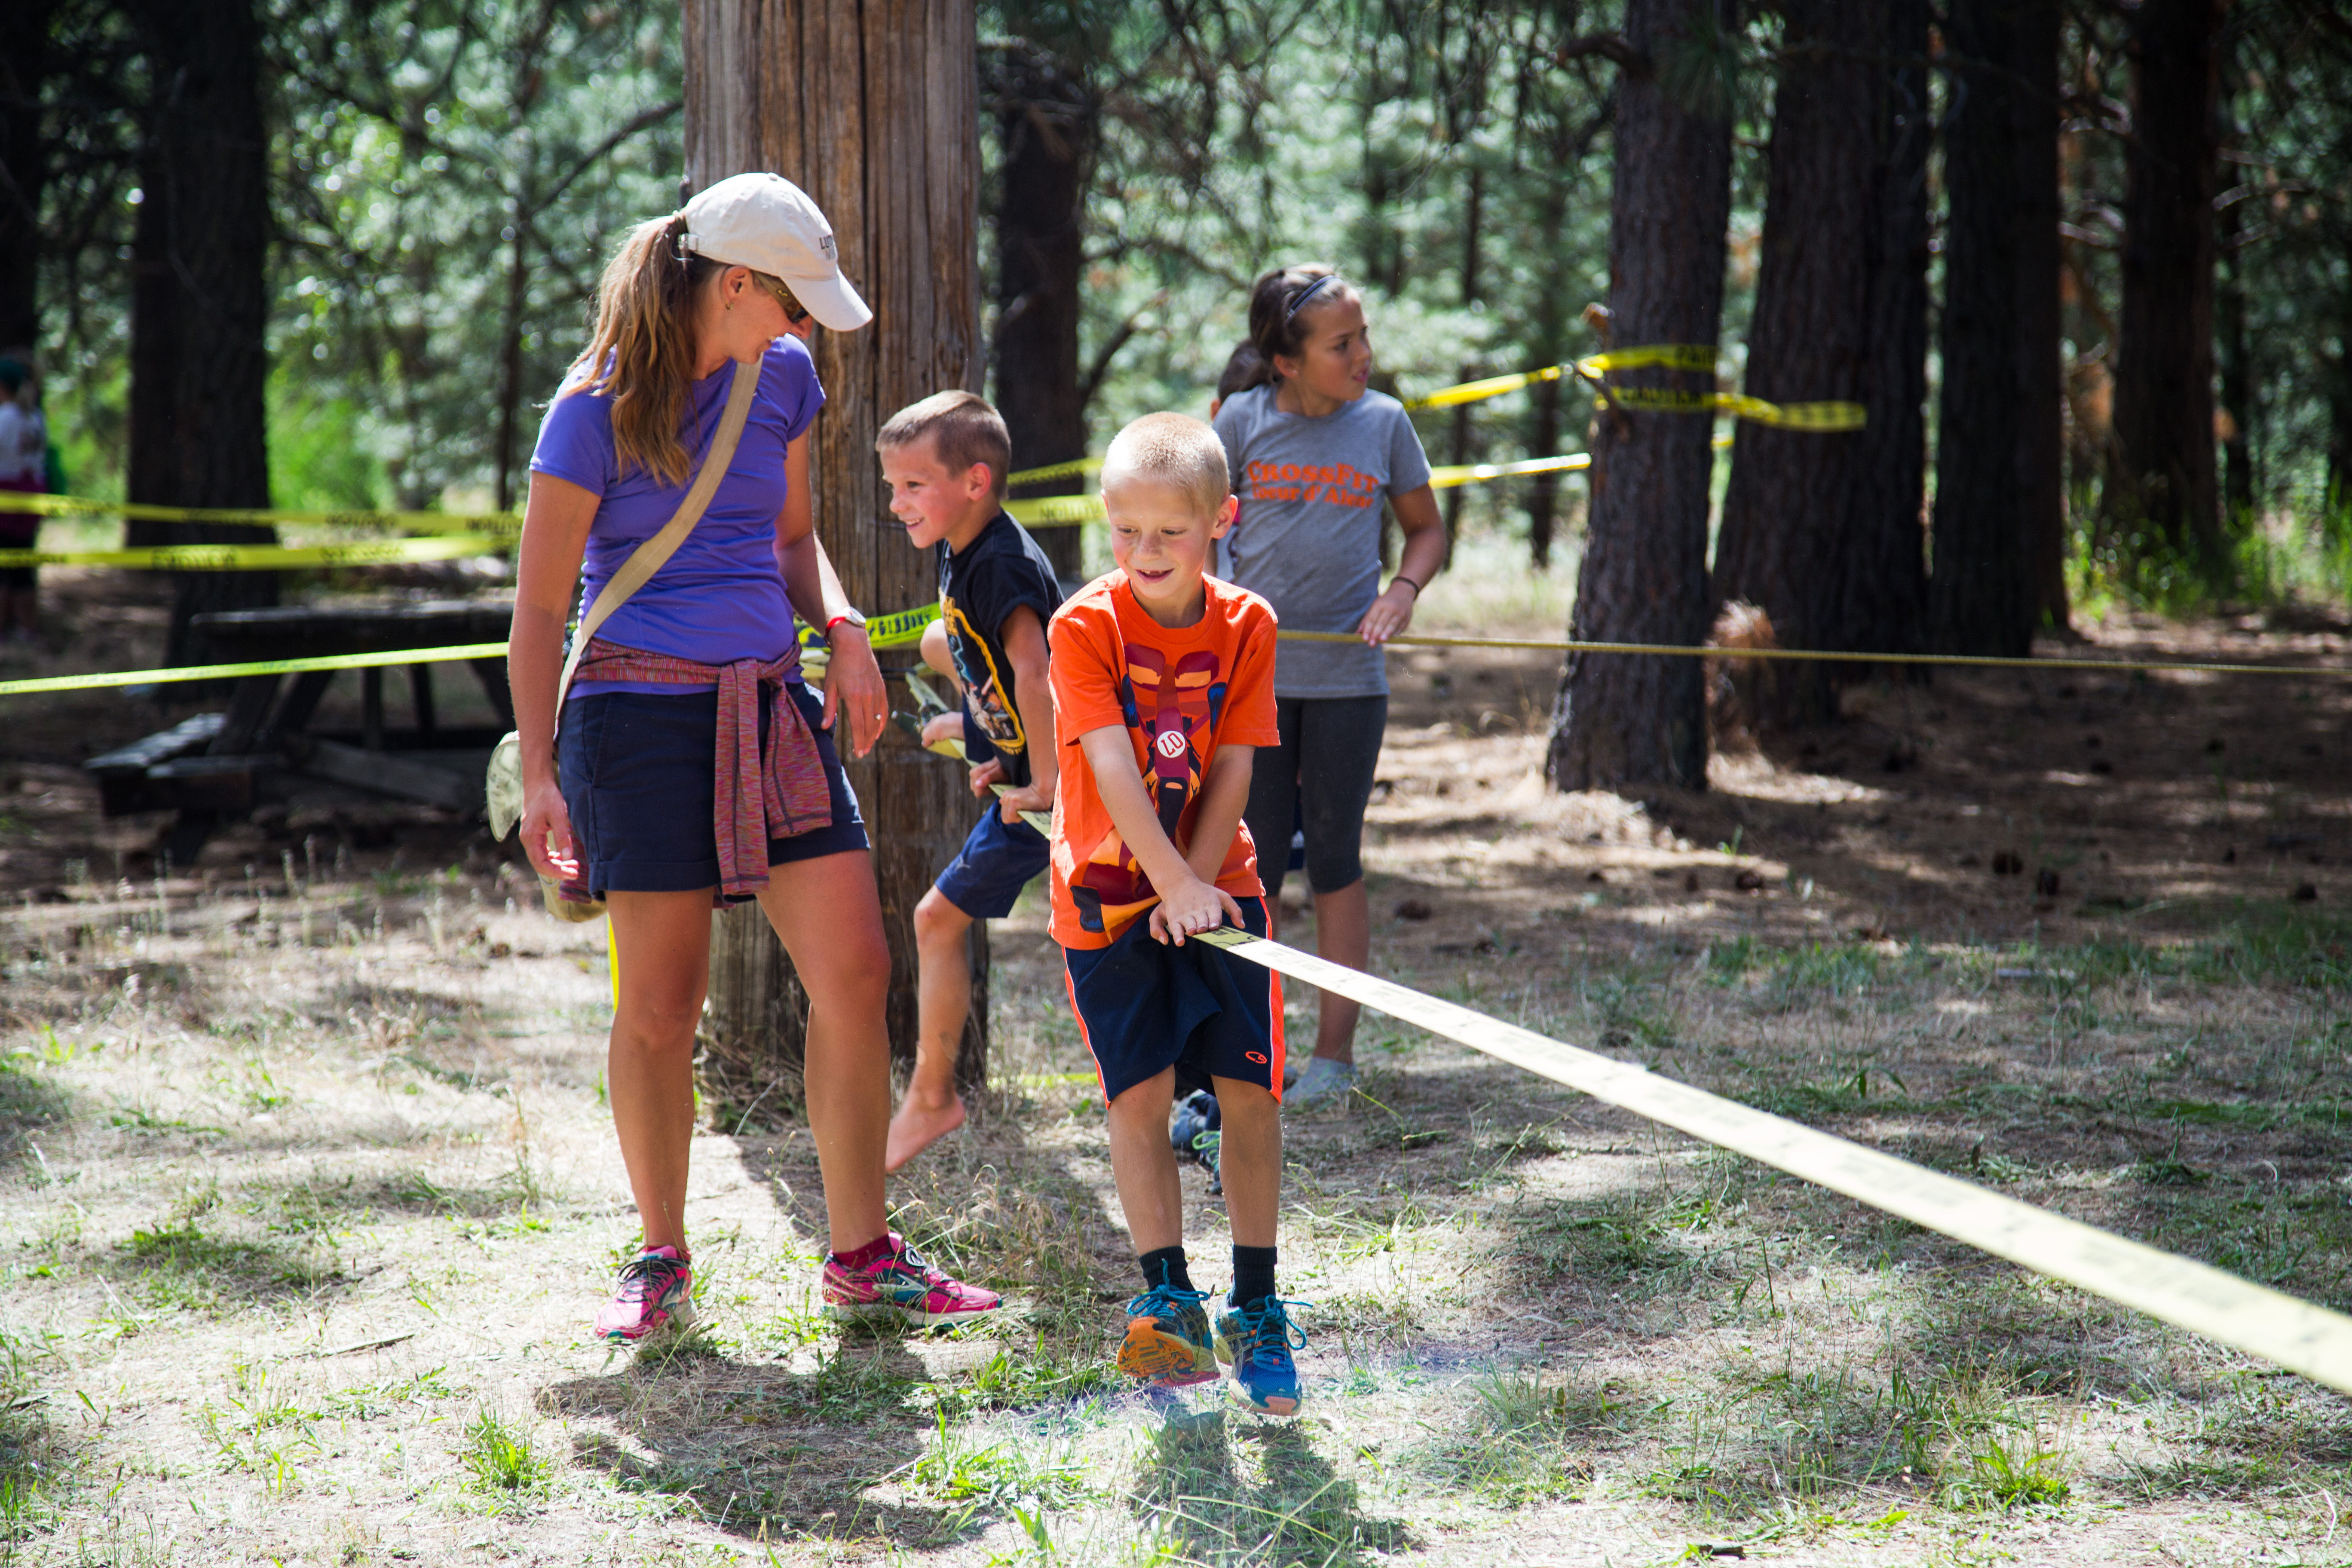 Photo of kids playing on slackline with parent watching.